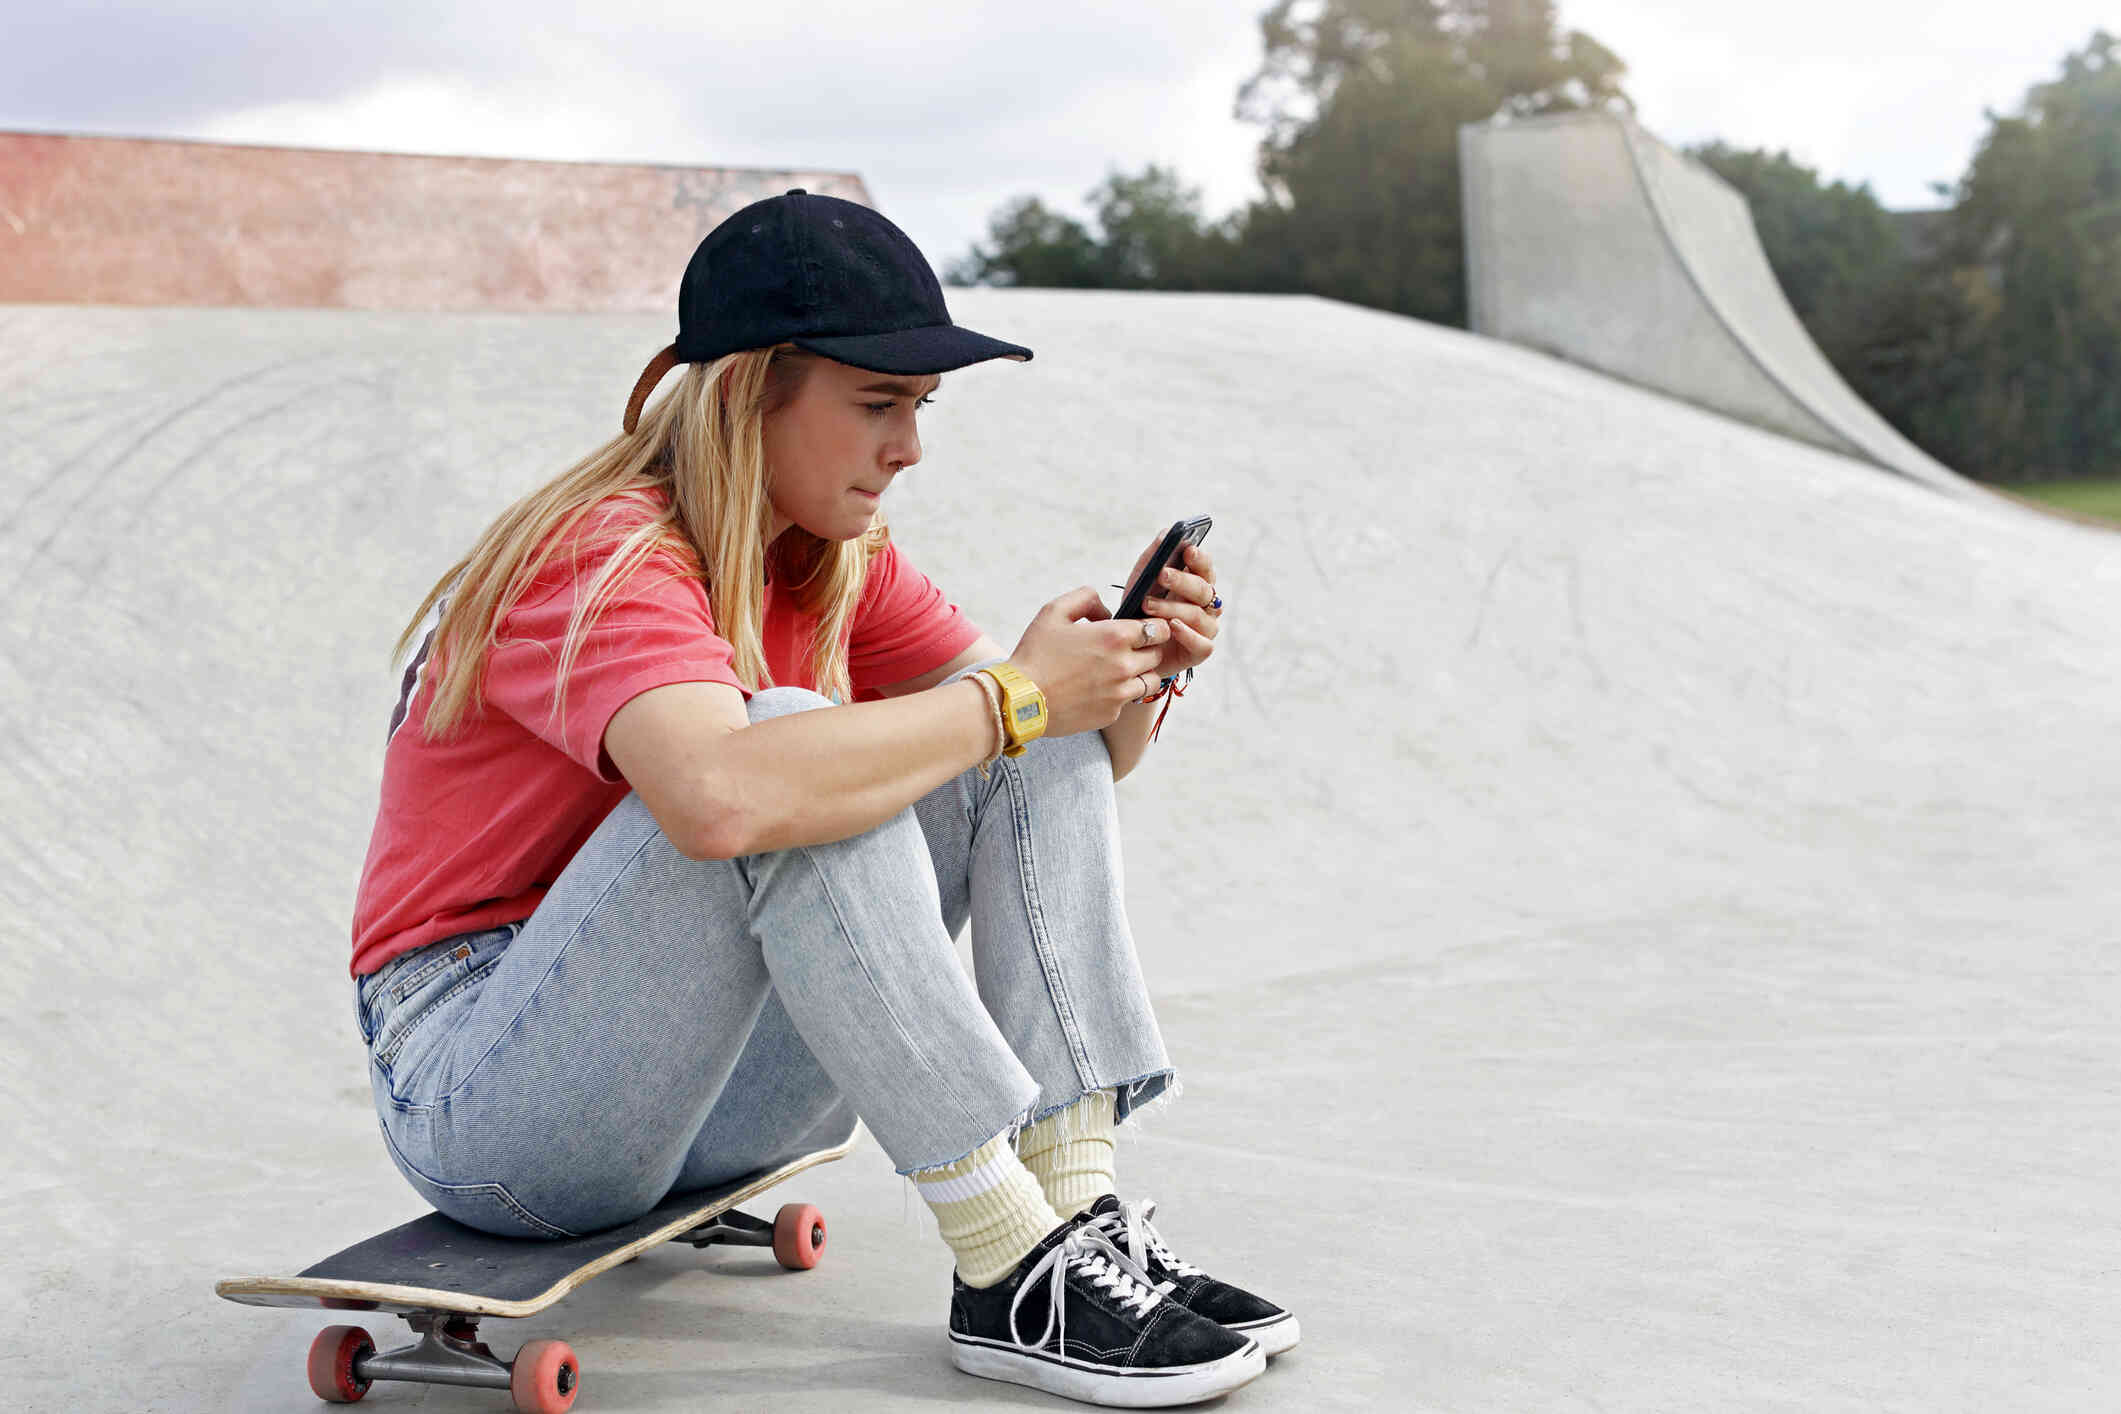 A teen girl in a baseball hat and red shirt sits on a skateboard and anxiously looks at a cellphone in her hand.